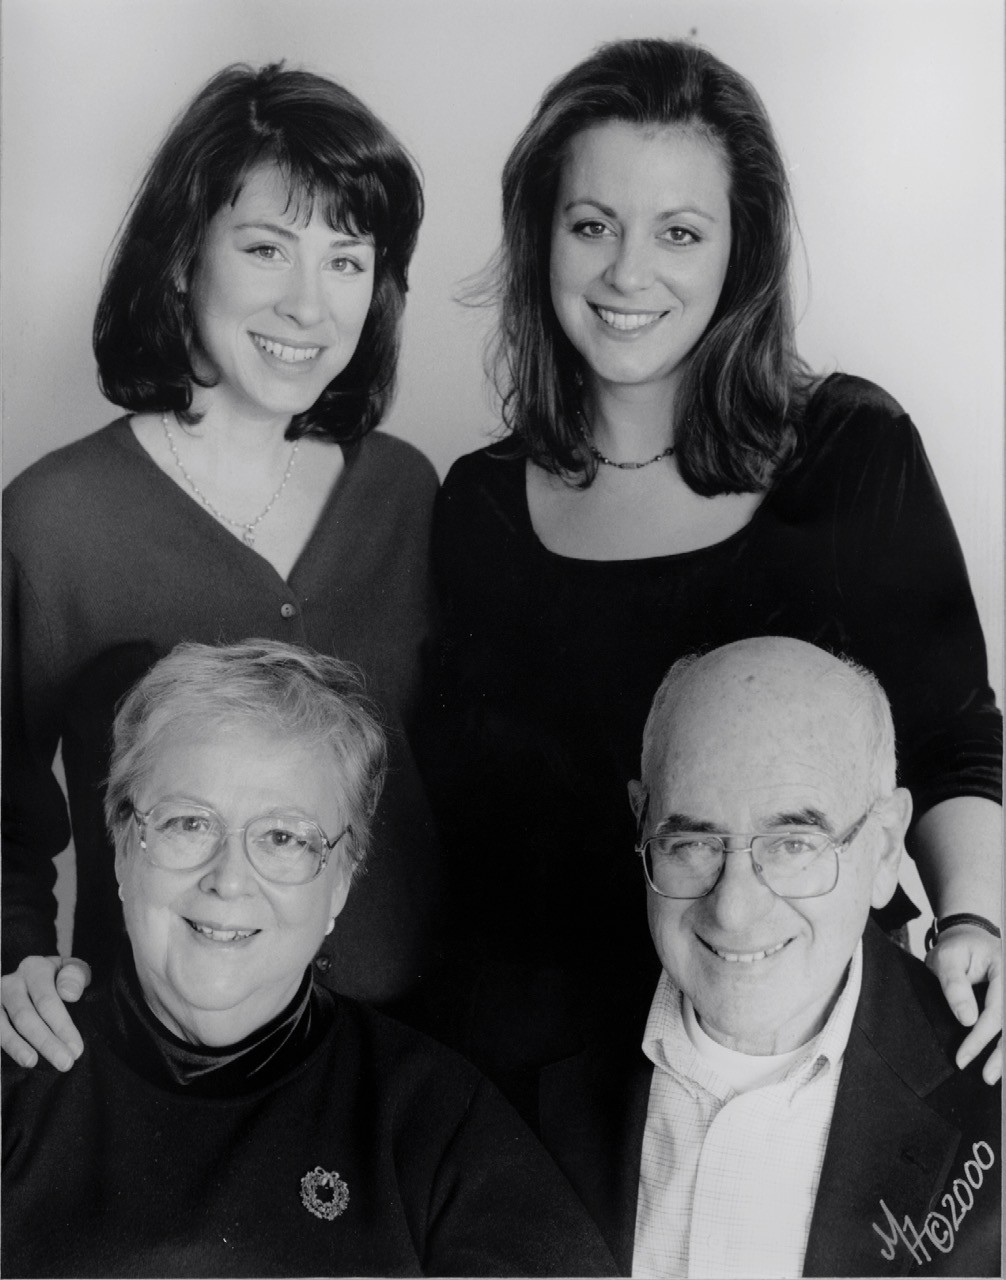 Jenn, her sister Liz, father Ed, and mother Joan (clockwise from top left)